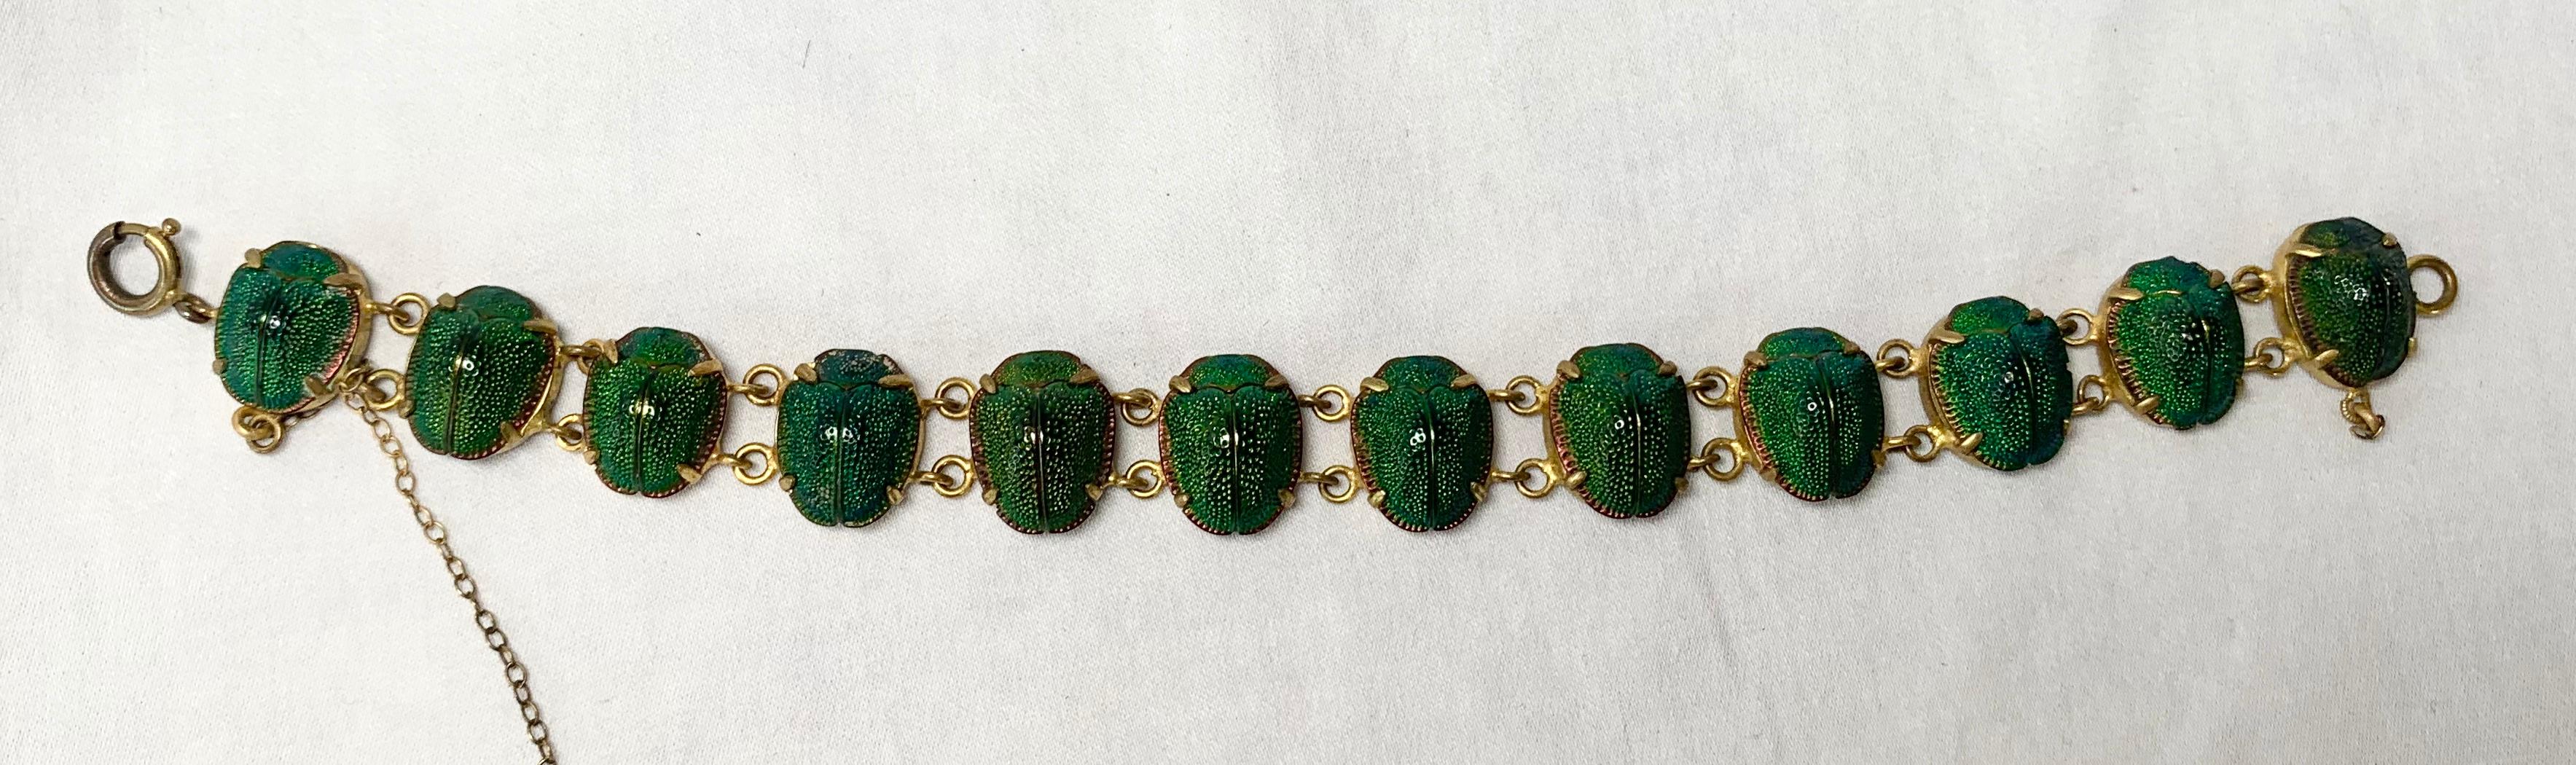 Iridescent Enamel Scarab Beetle Bracelet Antique Egyptian Revival In Good Condition For Sale In New York, NY